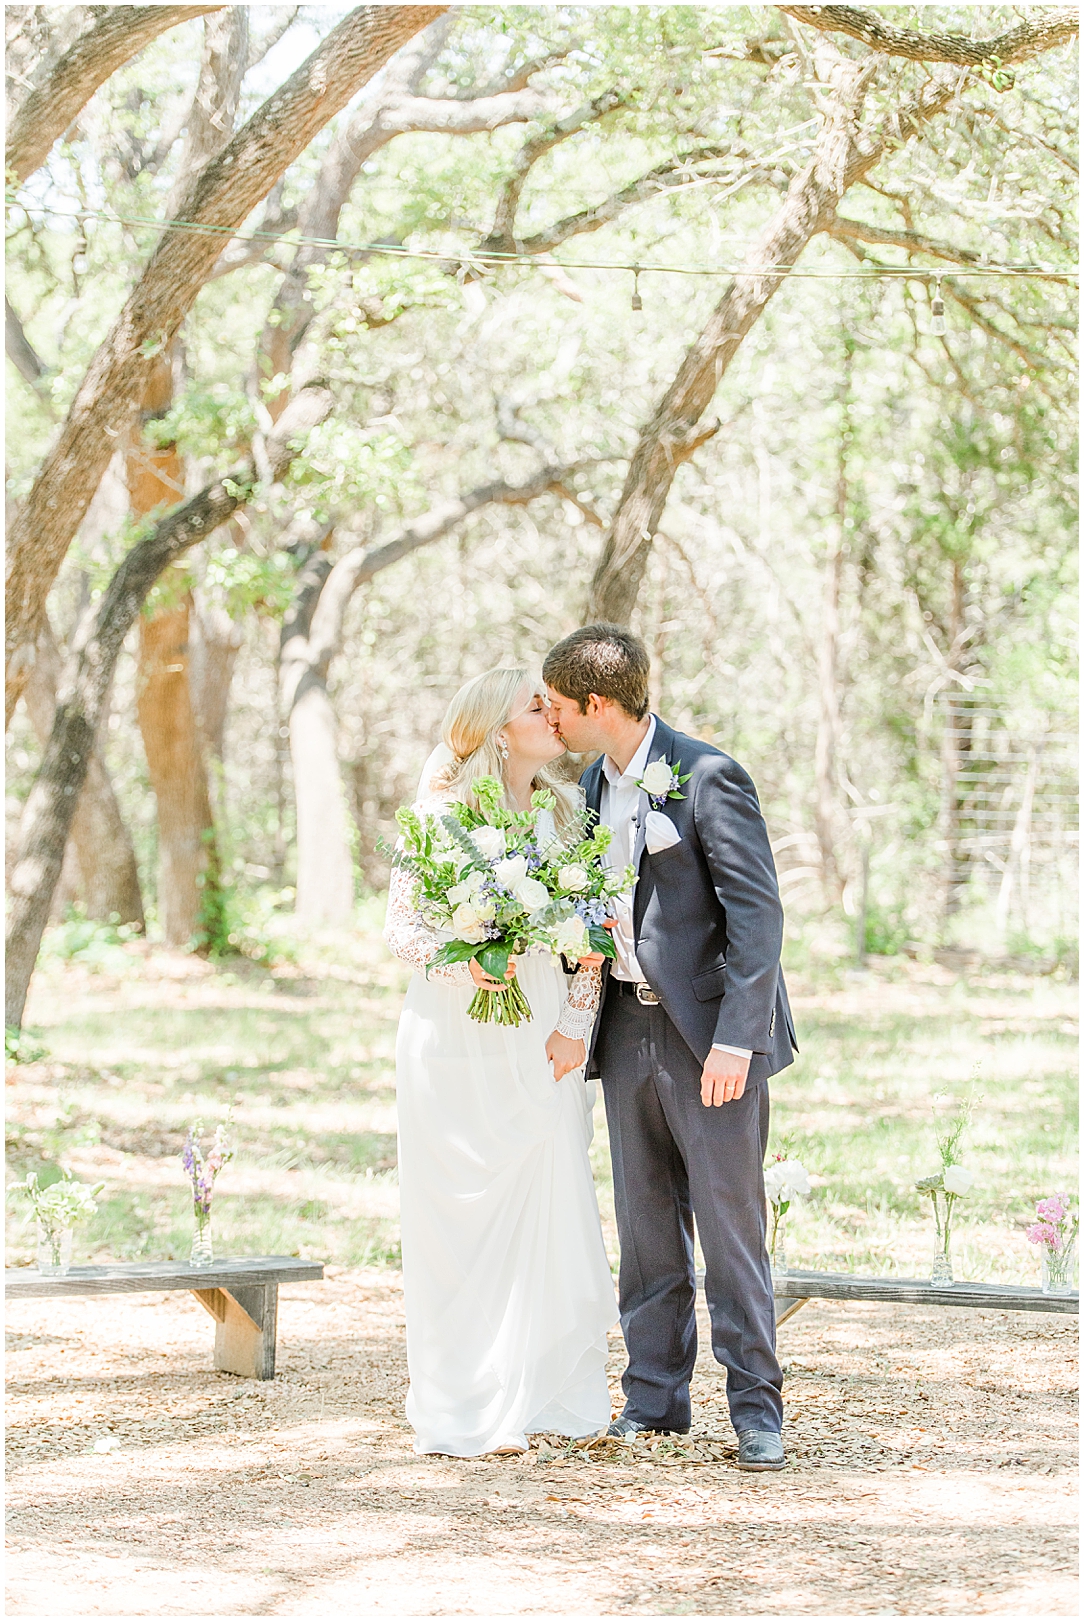 An Intimate elopement for two in Dripping Springs Texas by Allison Jeffers Photography 0030